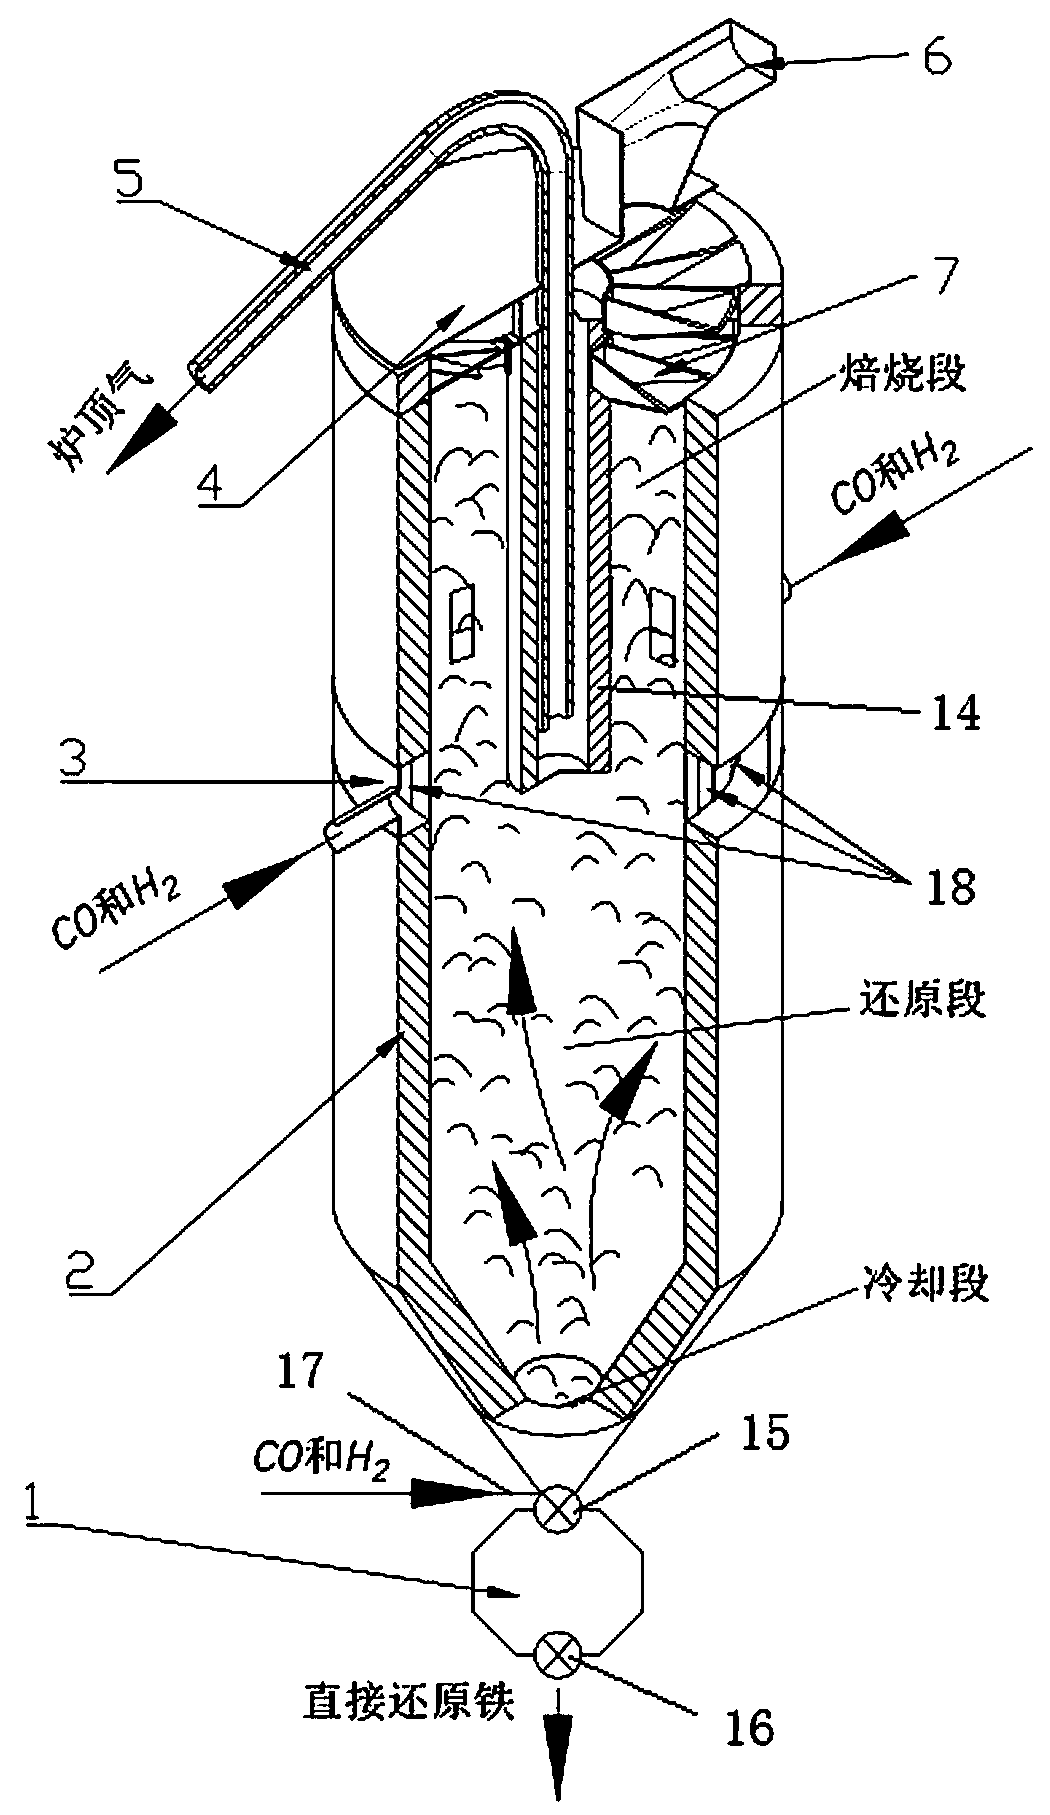 Device for directly preparing reduced sponge iron from pellets